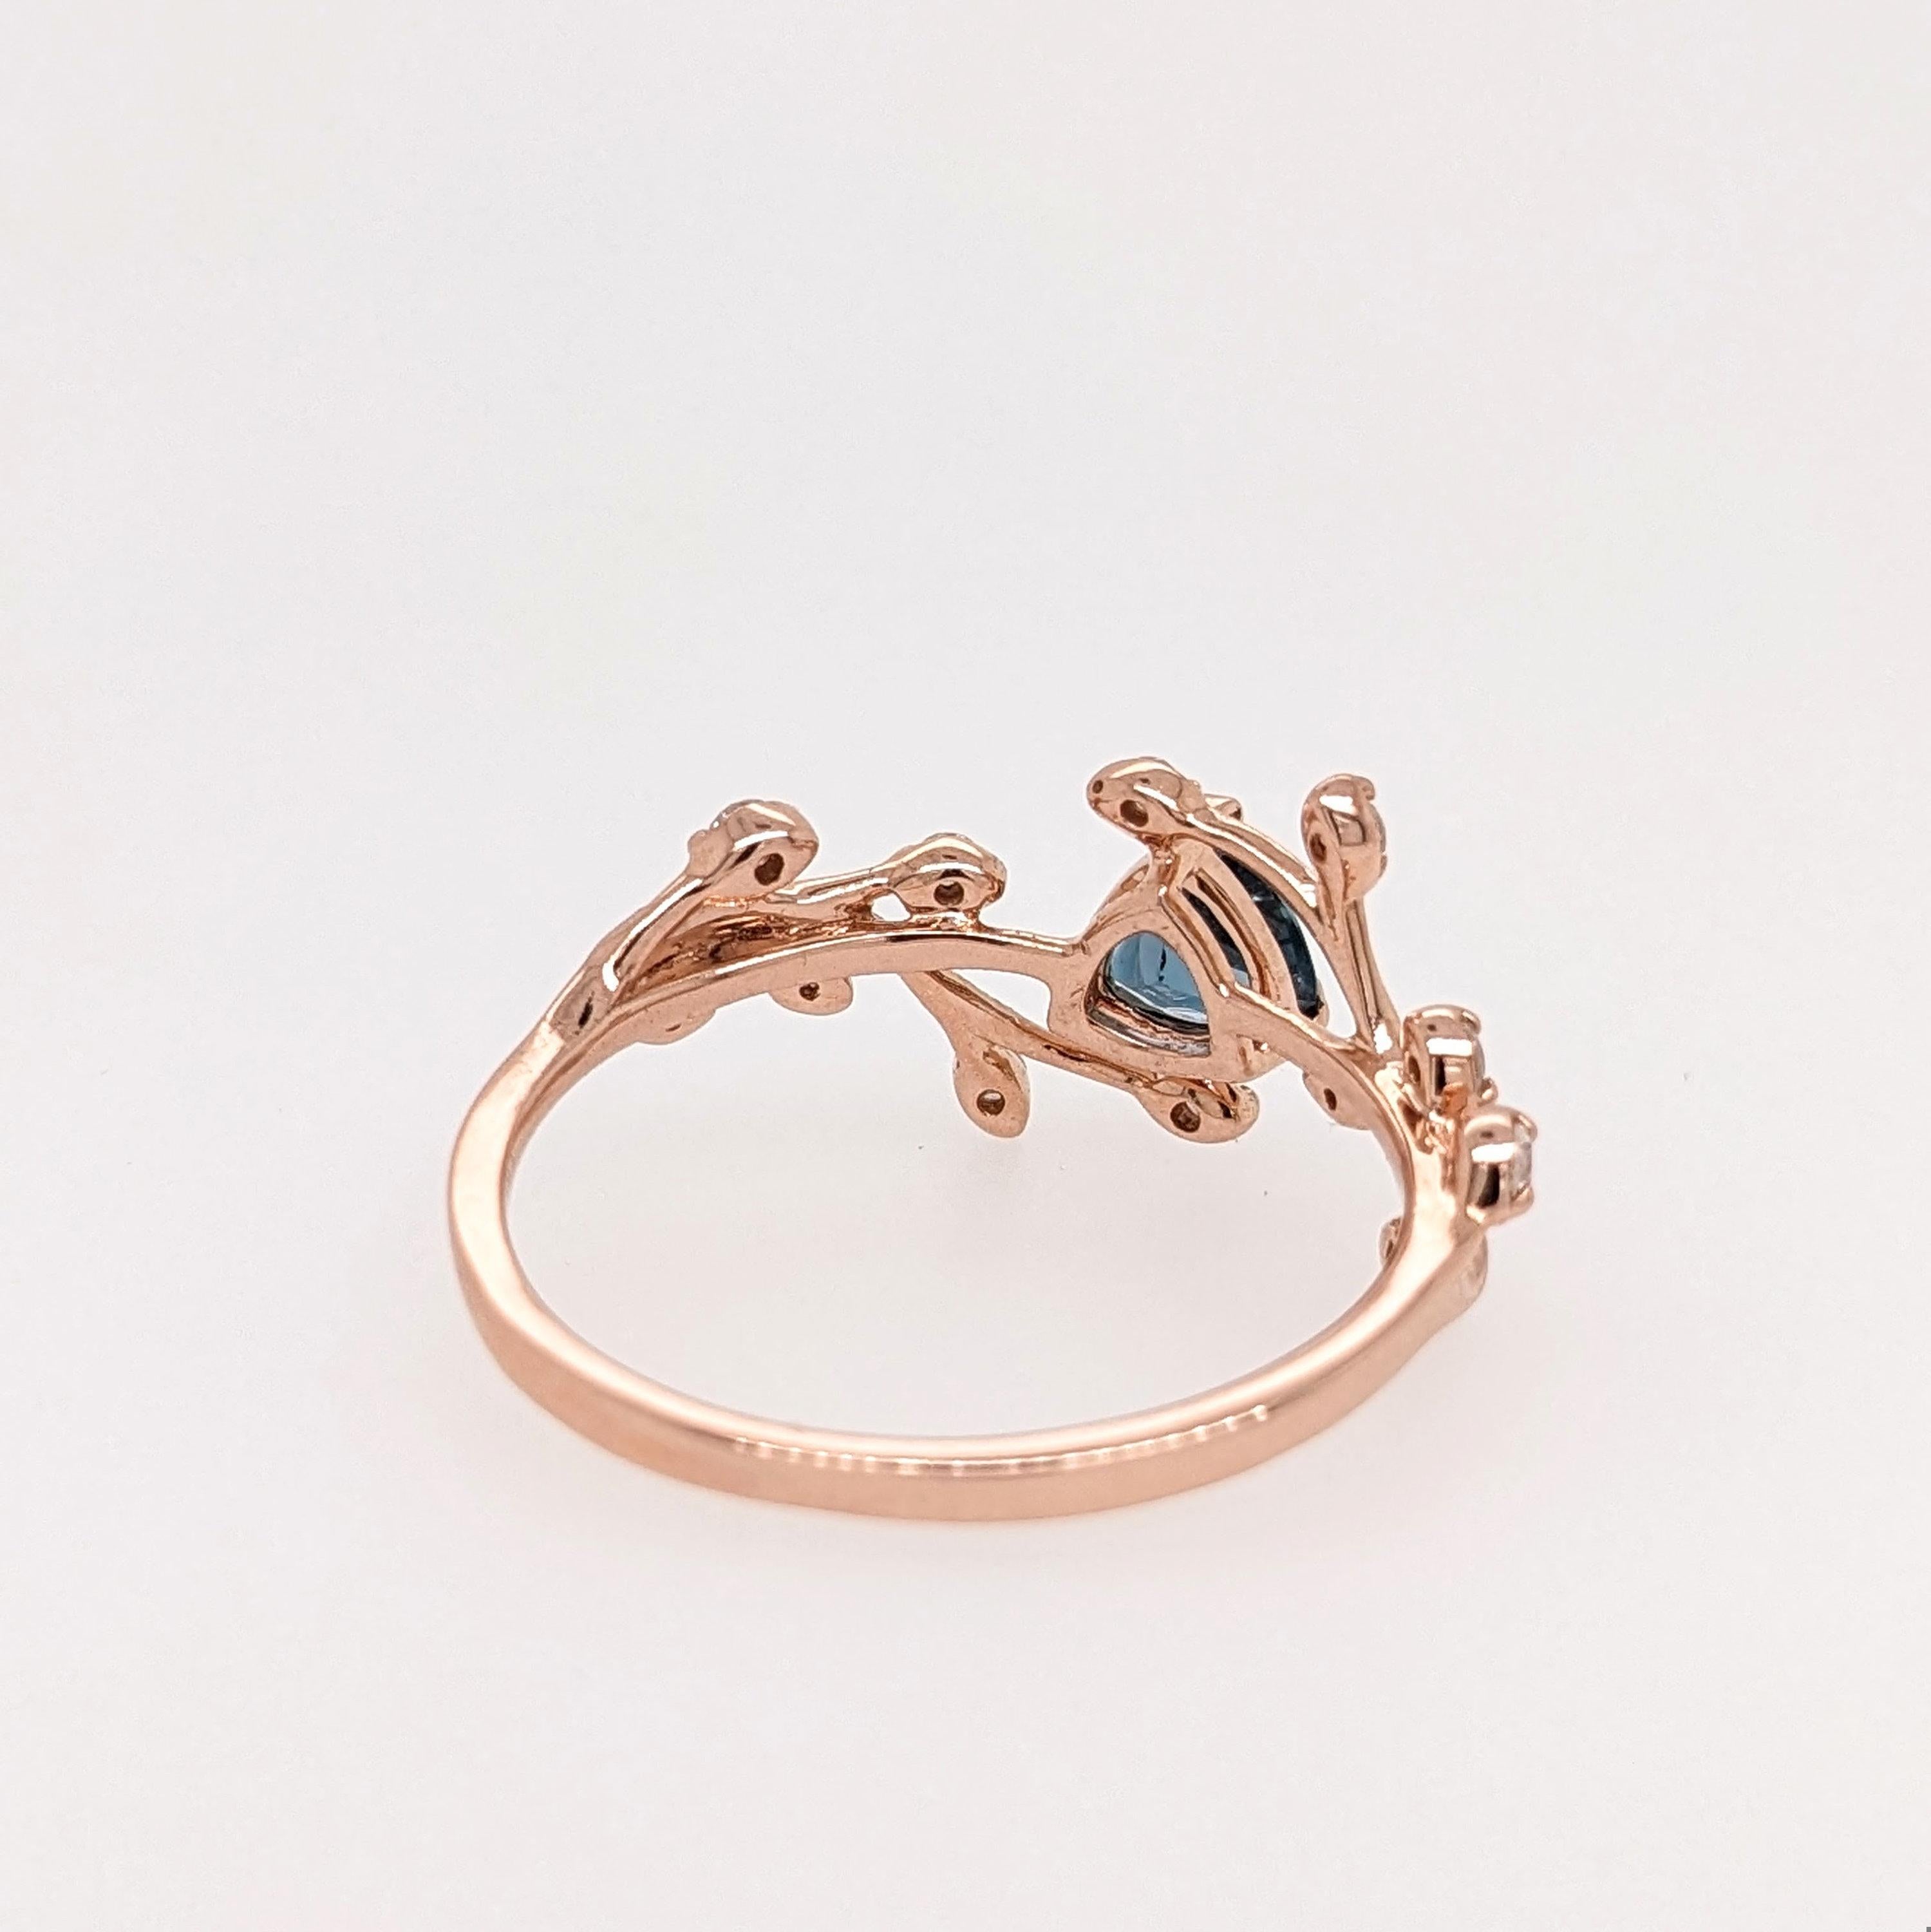 This delicate 14K rose gold ring setting features an earth mined london topaz with round natural earth mined diamond accents. A statement ring design perfect for an eye catching engagement or anniversary. This ring also makes a beautiful birthstone